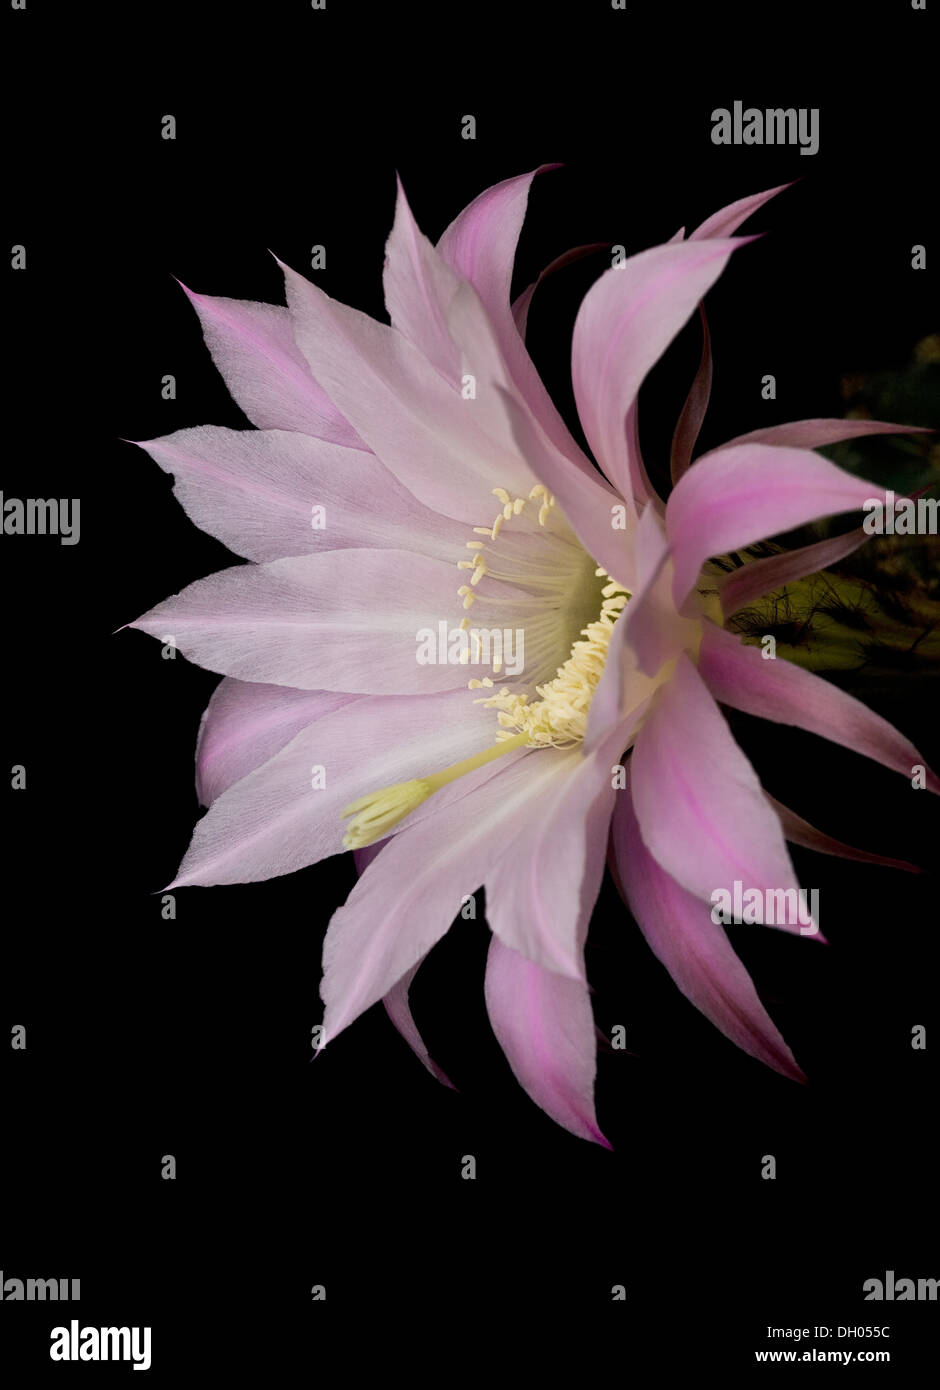 Queen of the Night cactus blooming flower beautiful vibrant colors purple yellow separated on black background Stock Photo